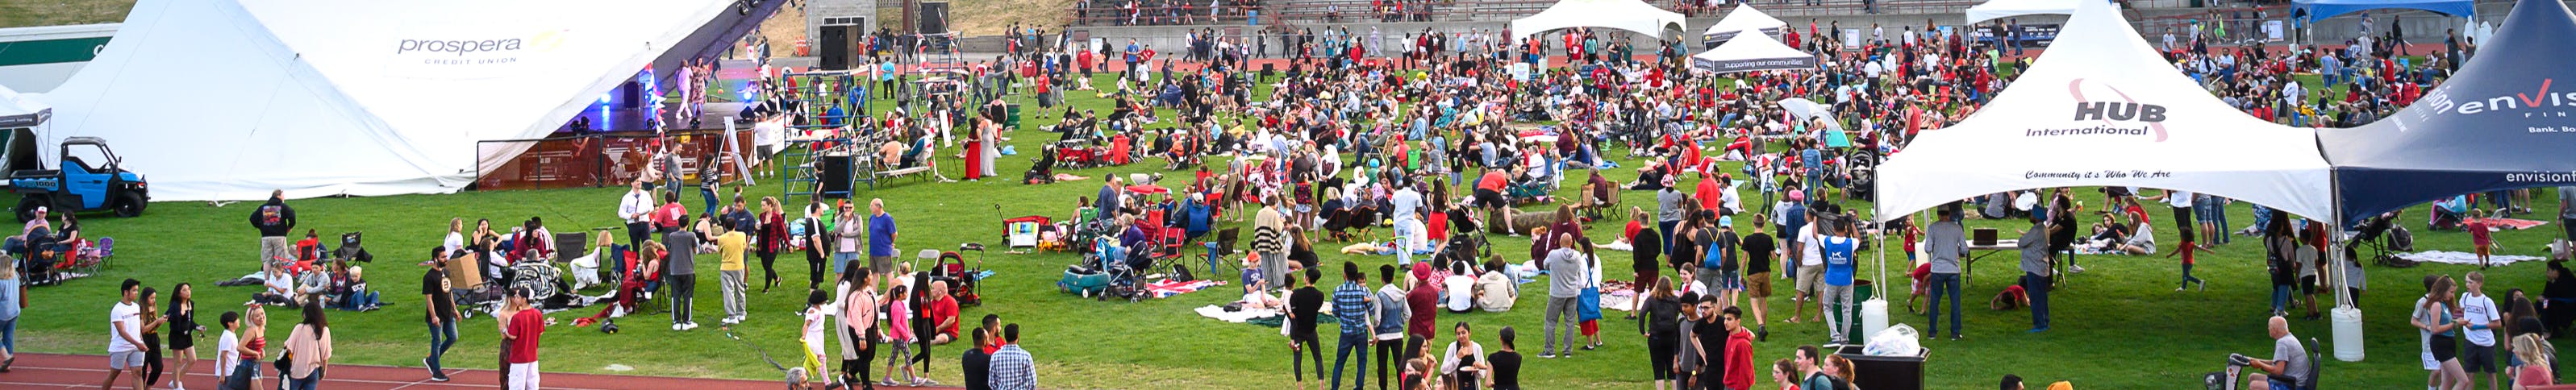 Image of Canada Day Event people on a field and tents